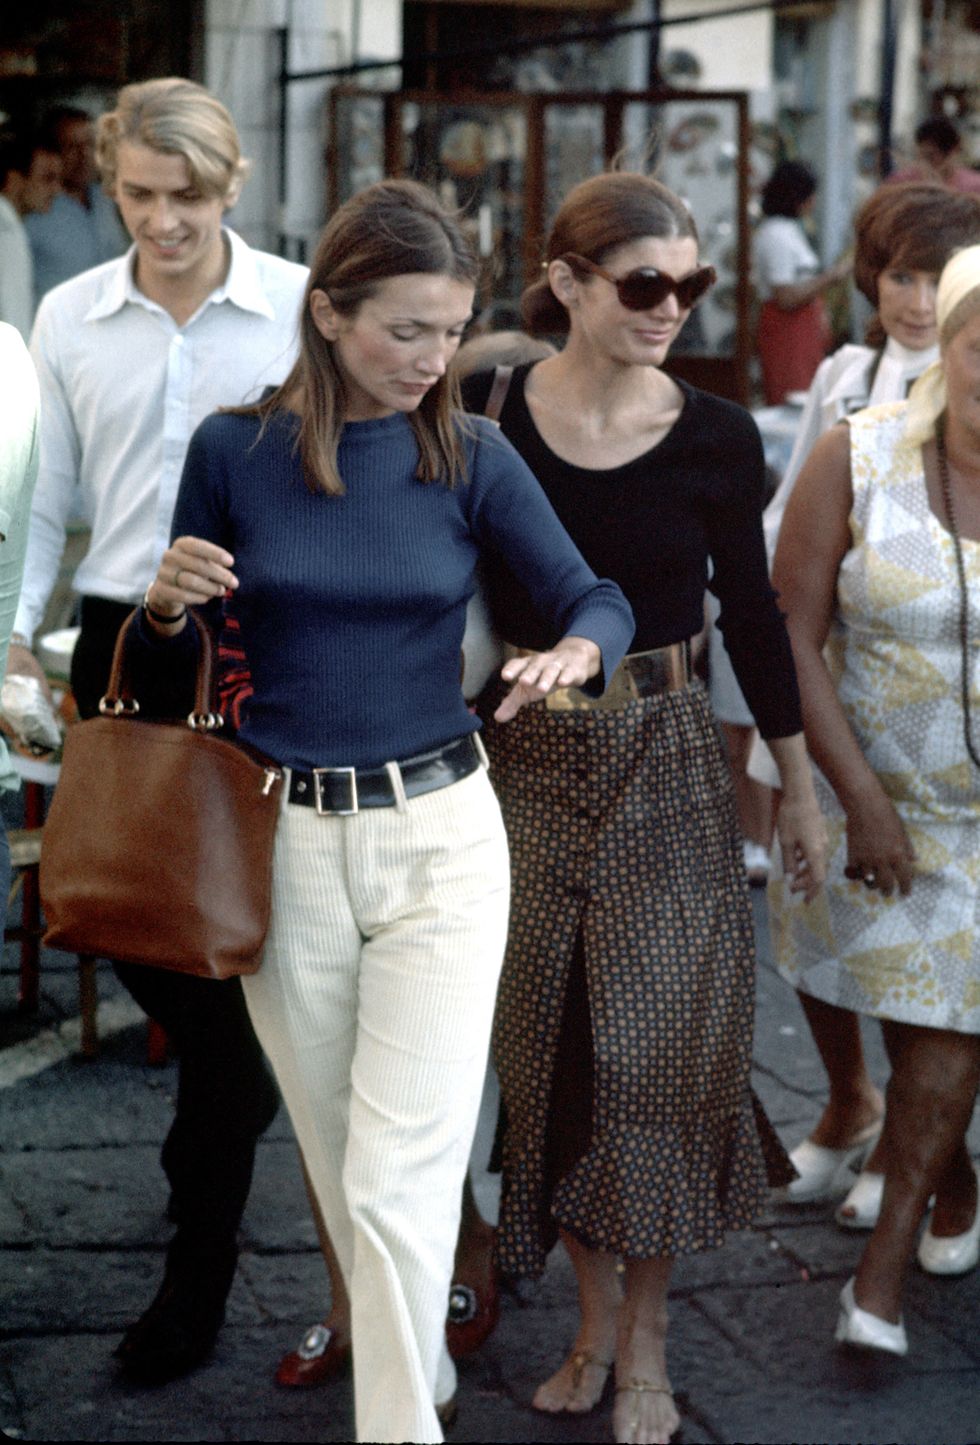 lee radziwill and jackie onassis photo by ron galellaron galella collection via getty images